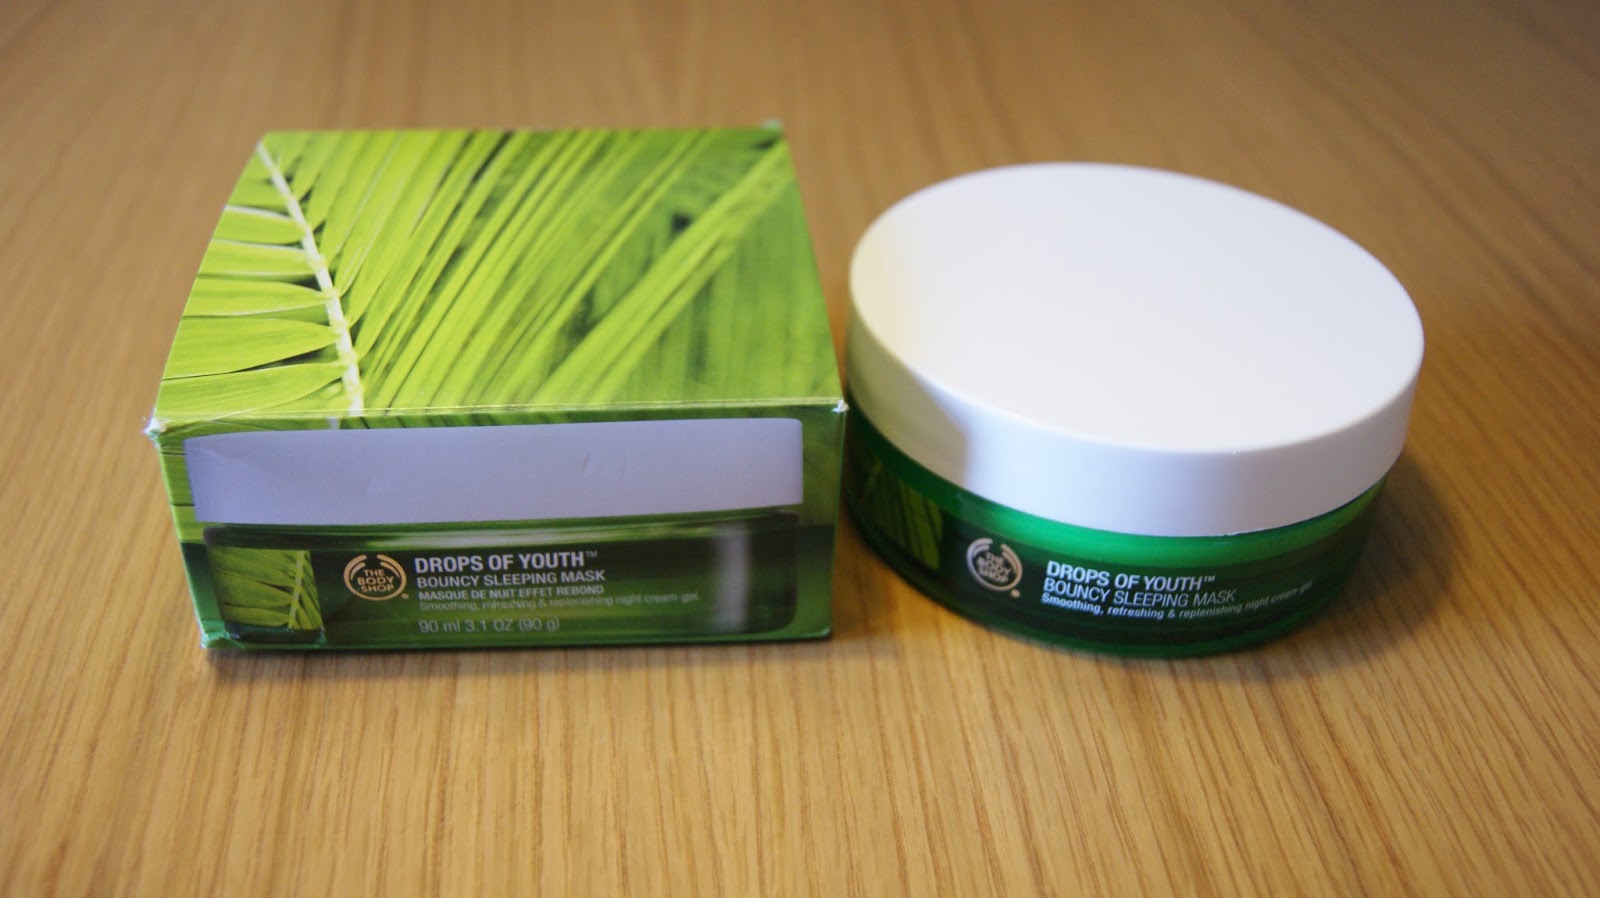 The Body Shop Drops of Youth Bouncy Sleeping Mask Review